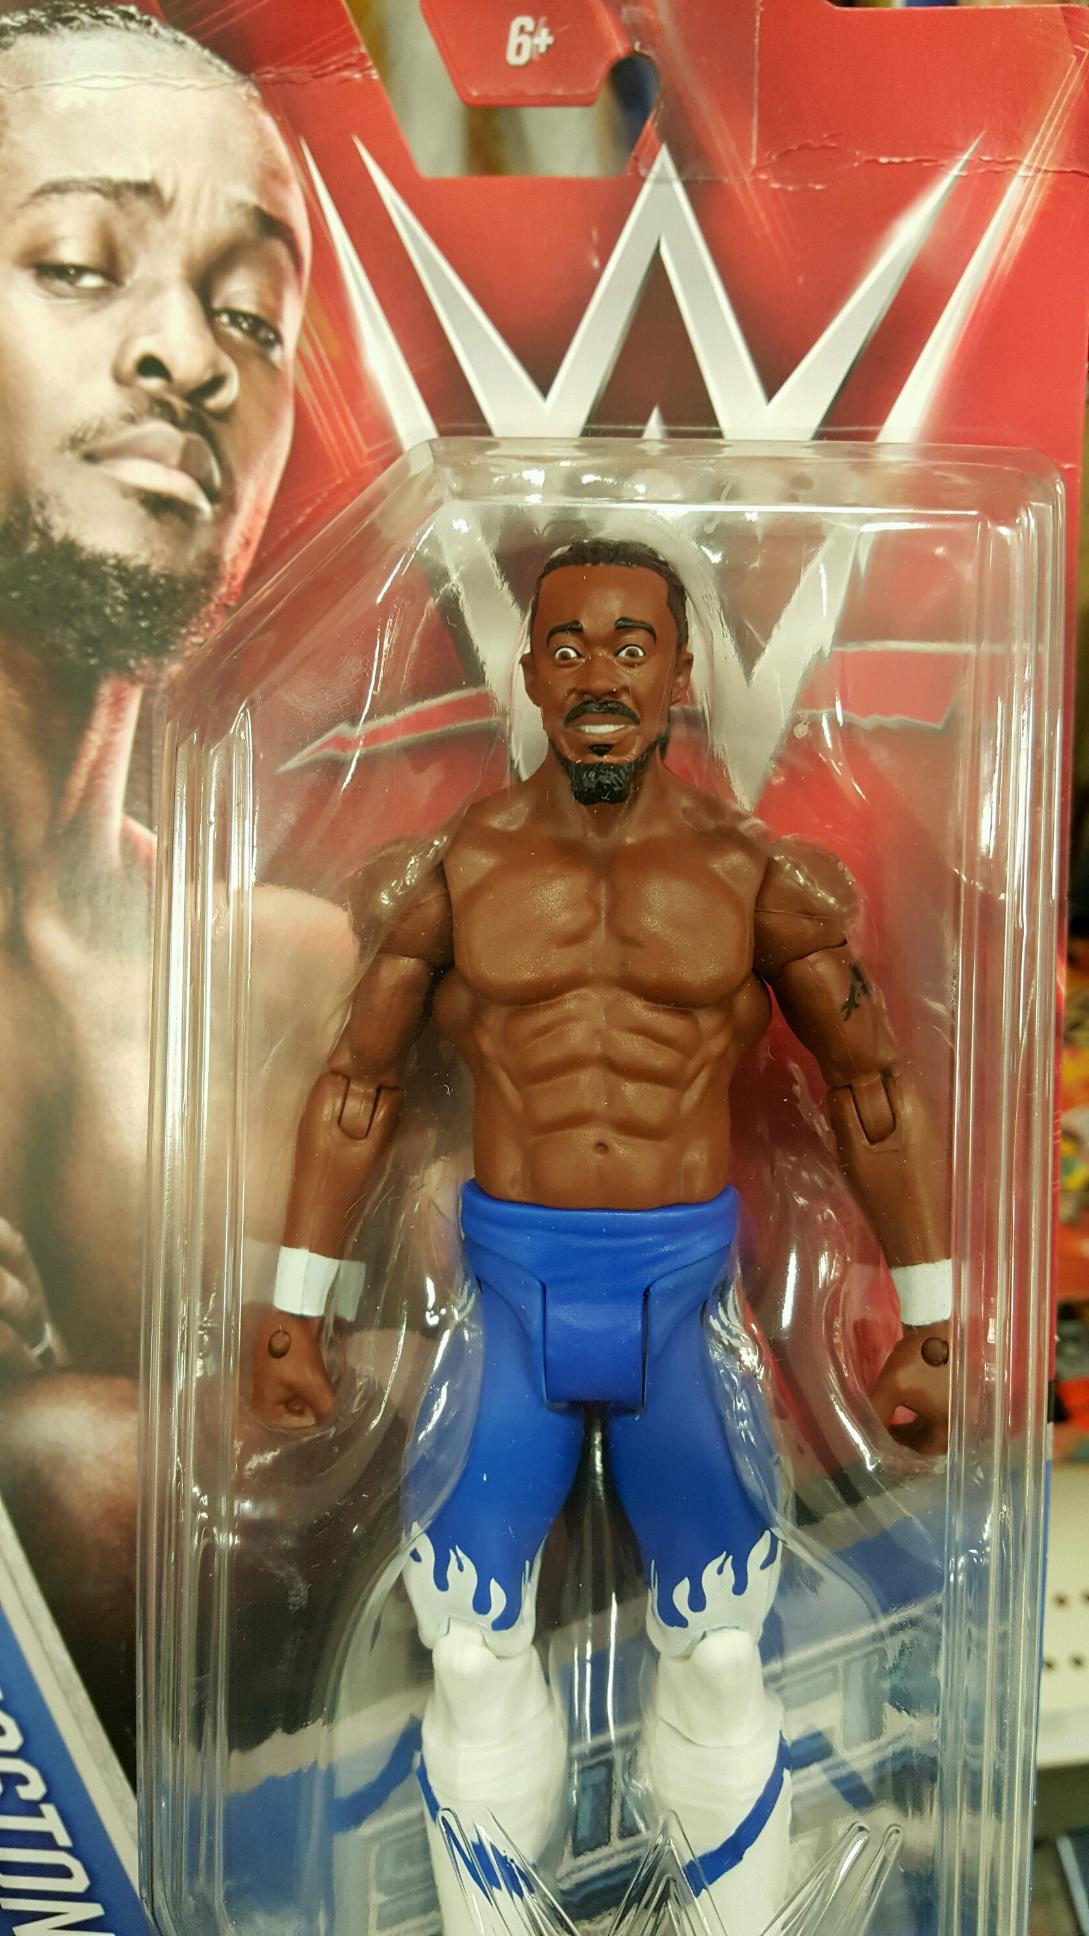 Fully Poseable Wrestling Figure Podcast Ep 18 ”The One and Only Wrestling Figure Podcat”